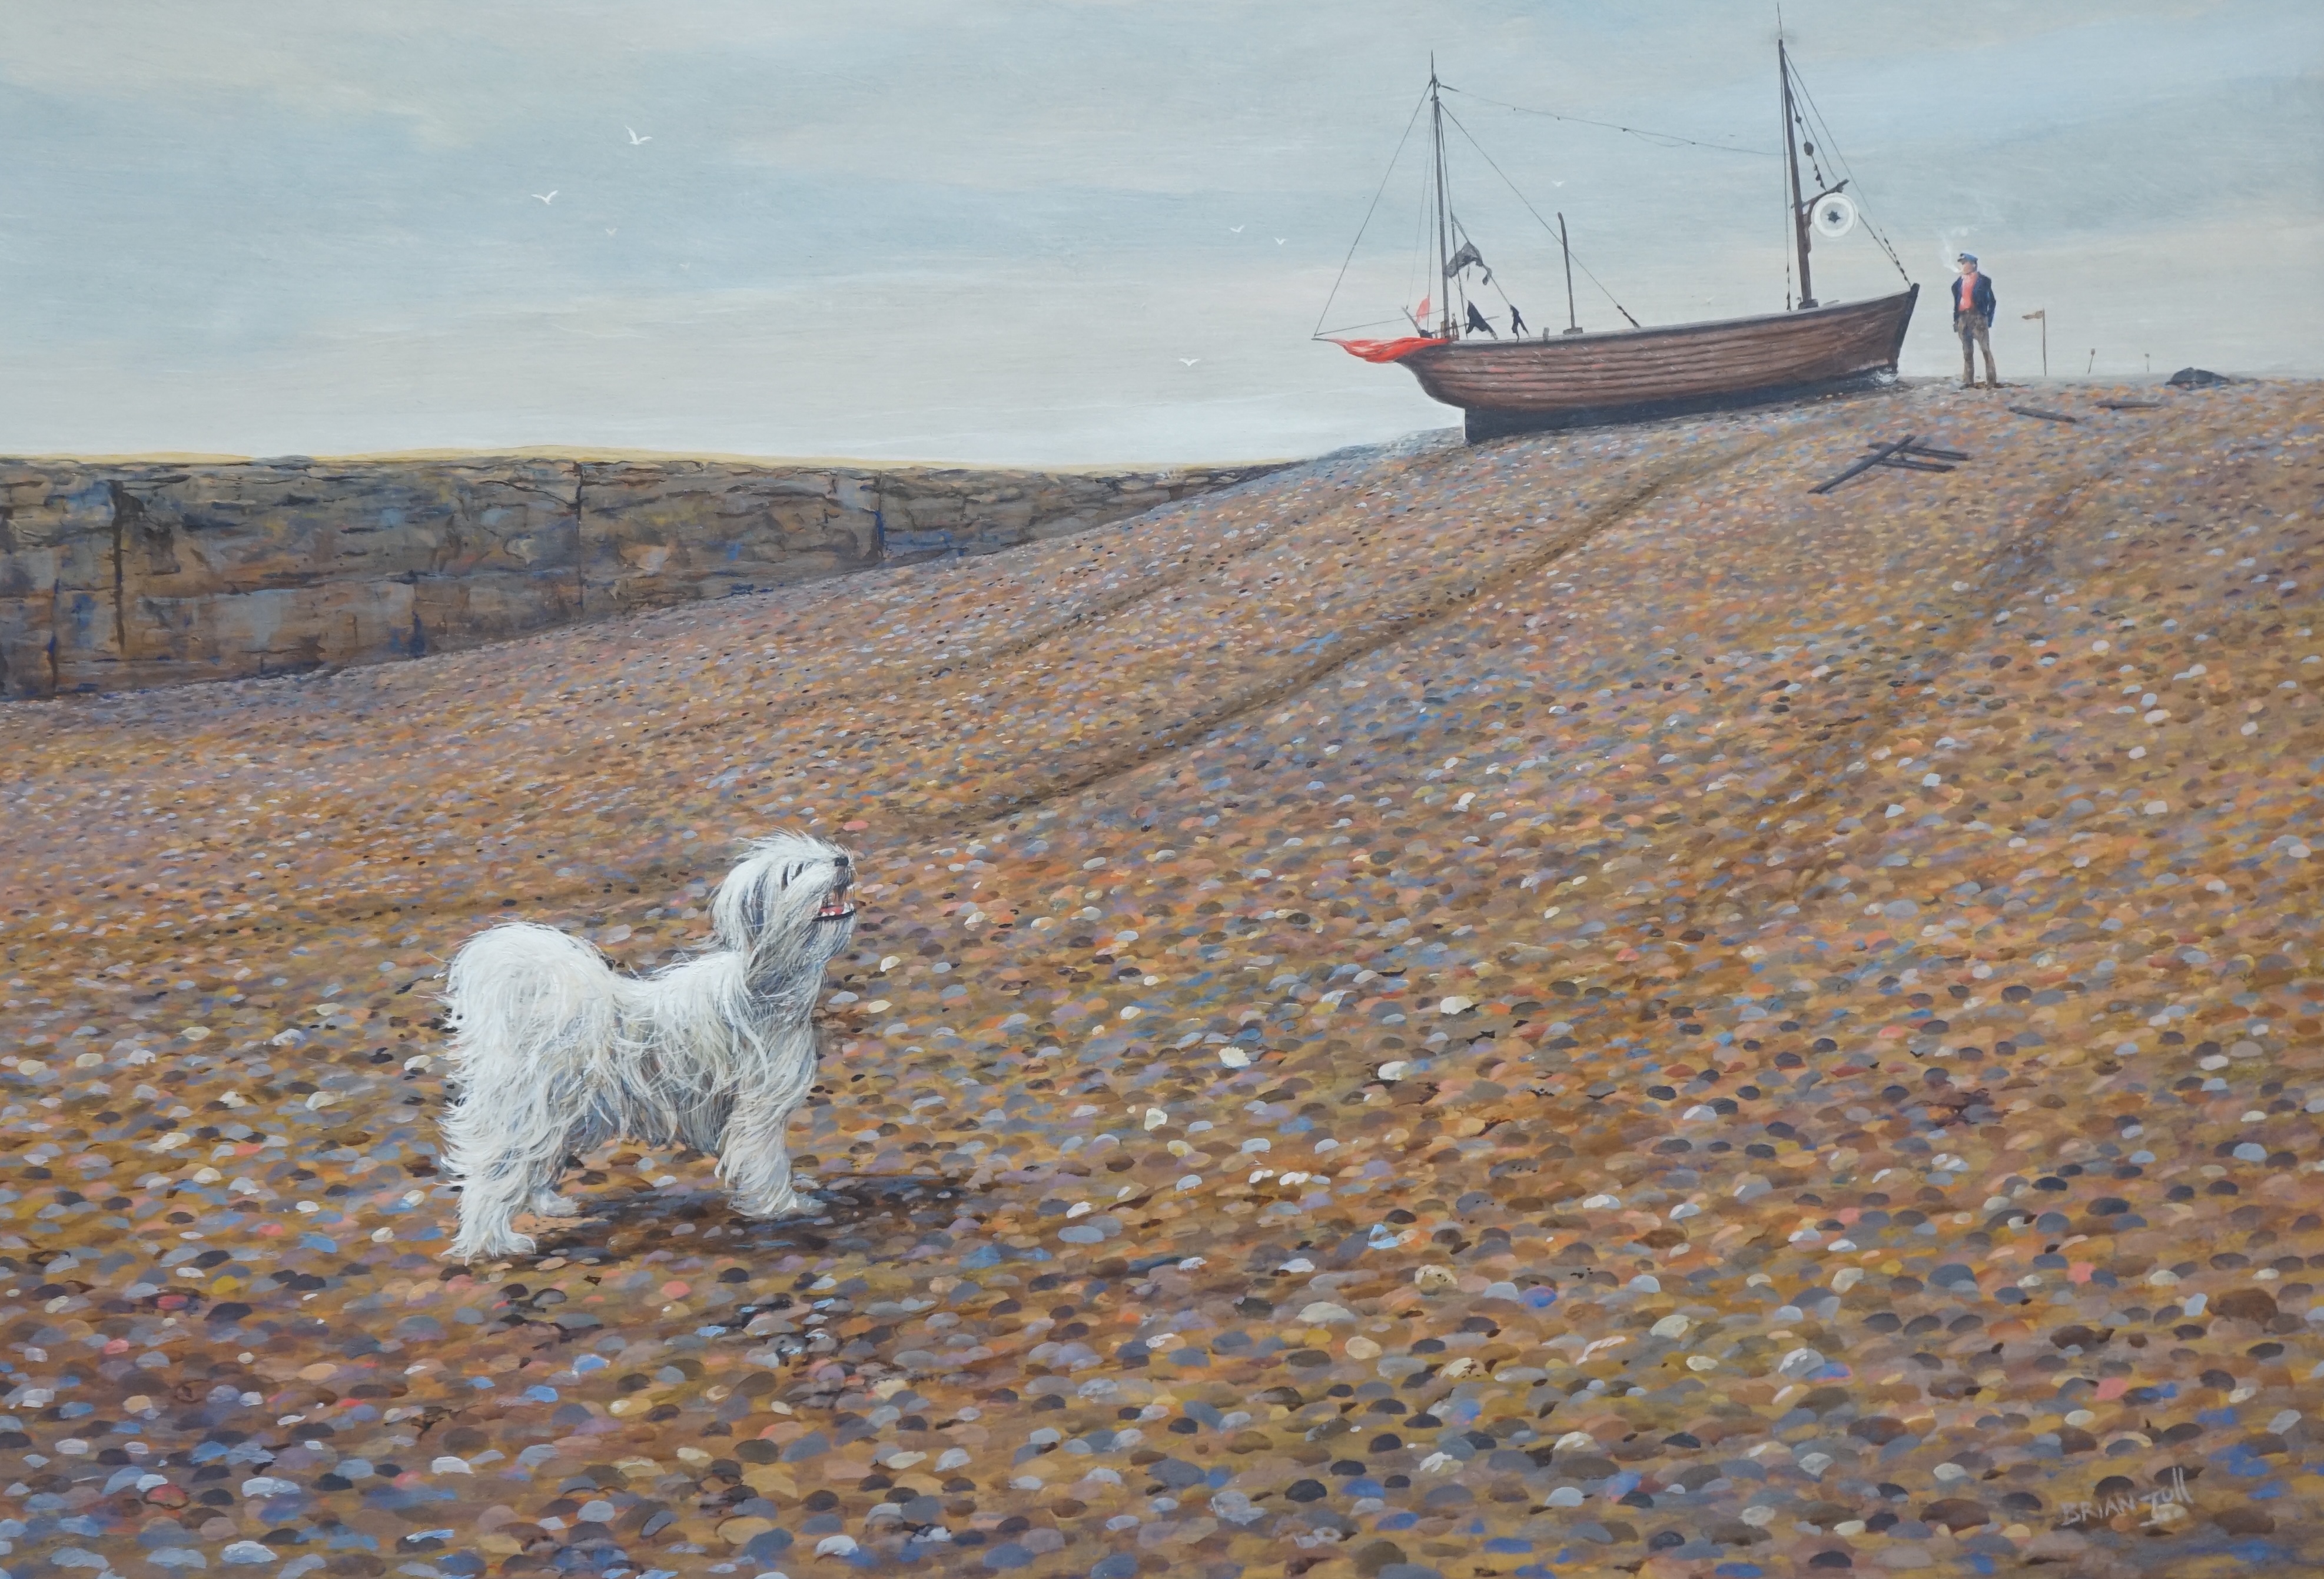 Brian Toll, acrylic on board, Coastal view with terrier before a sailing boat, signed, 53 x 76cm. Condition - good